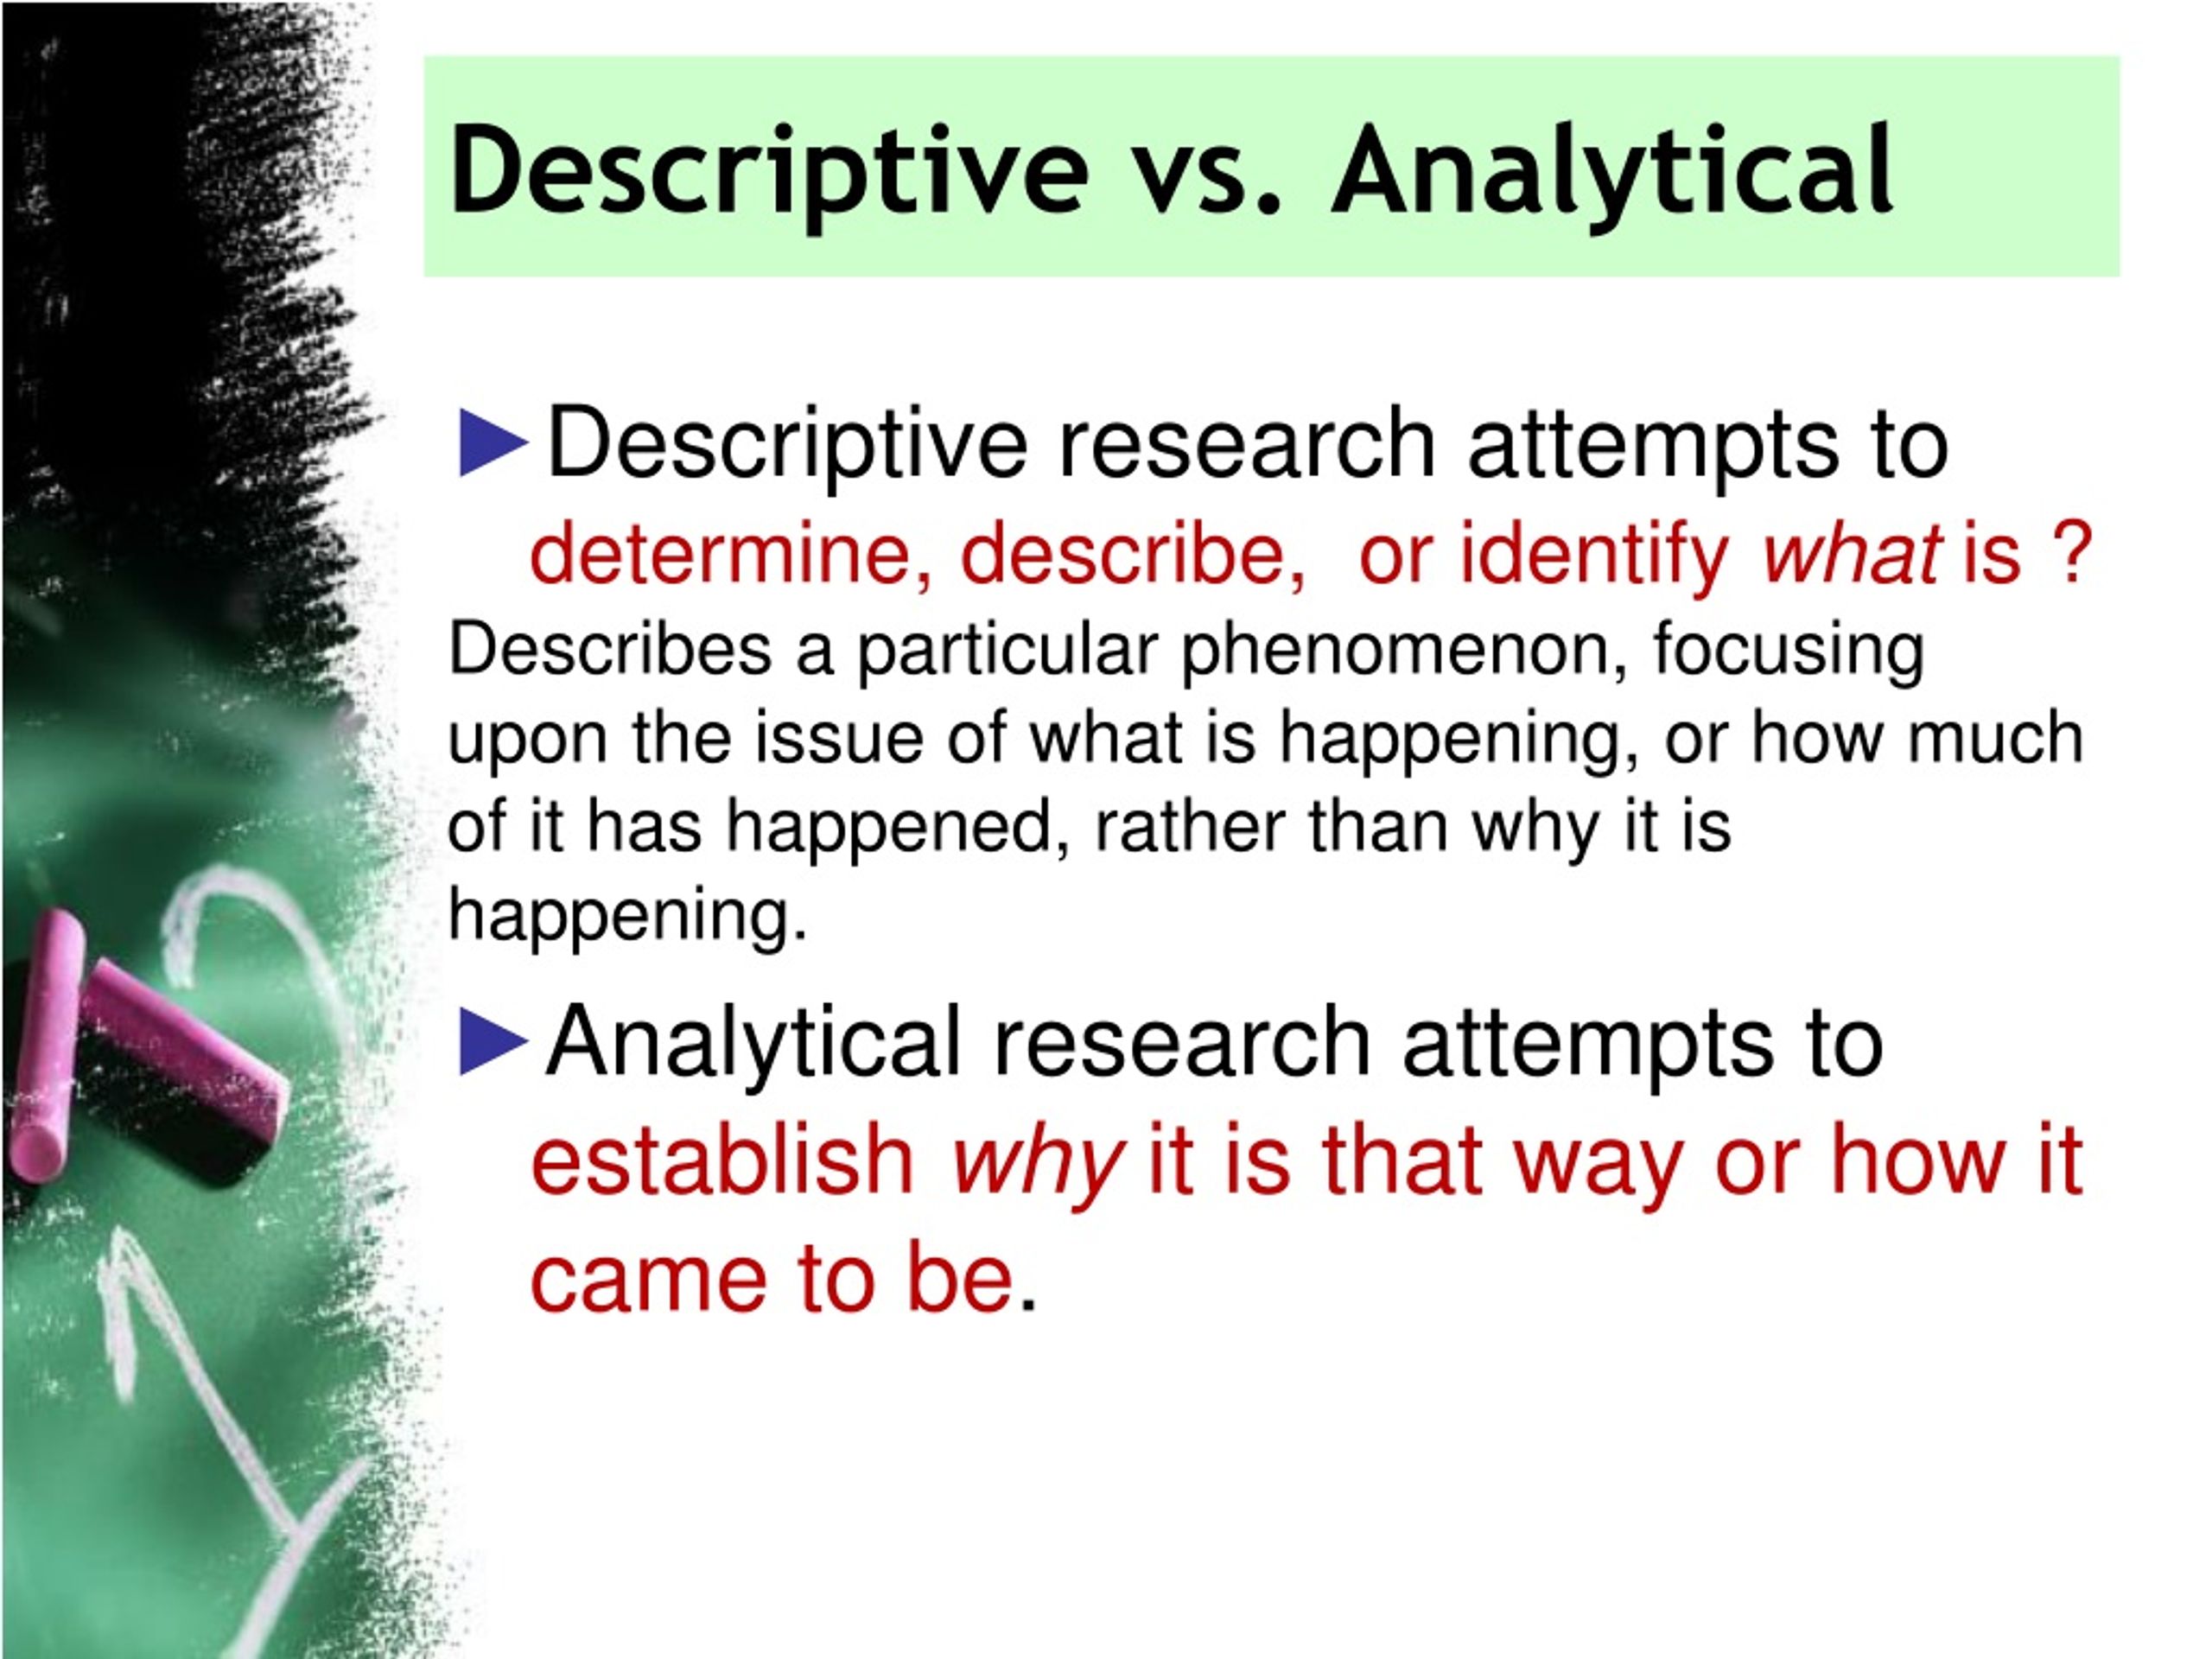 descriptive research and analytical research examples